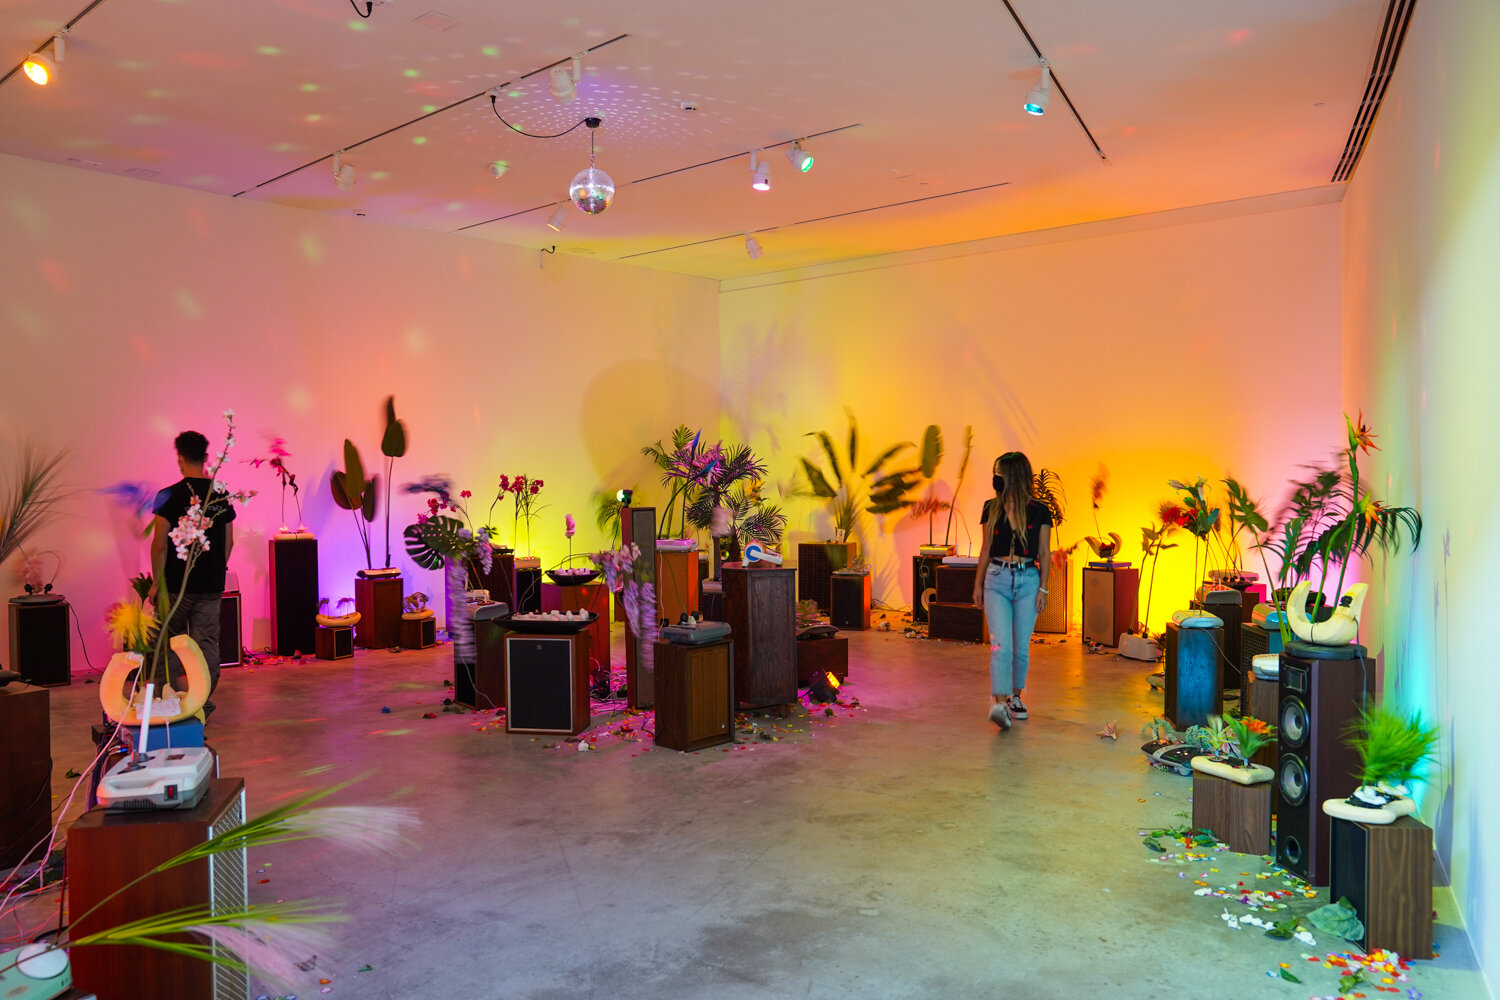   Gather,  Contemporary Art Museum, St. Louis   Massagers, artificial plants, speakers, sound, 2020 Installation photograph by Dusty Kessler 